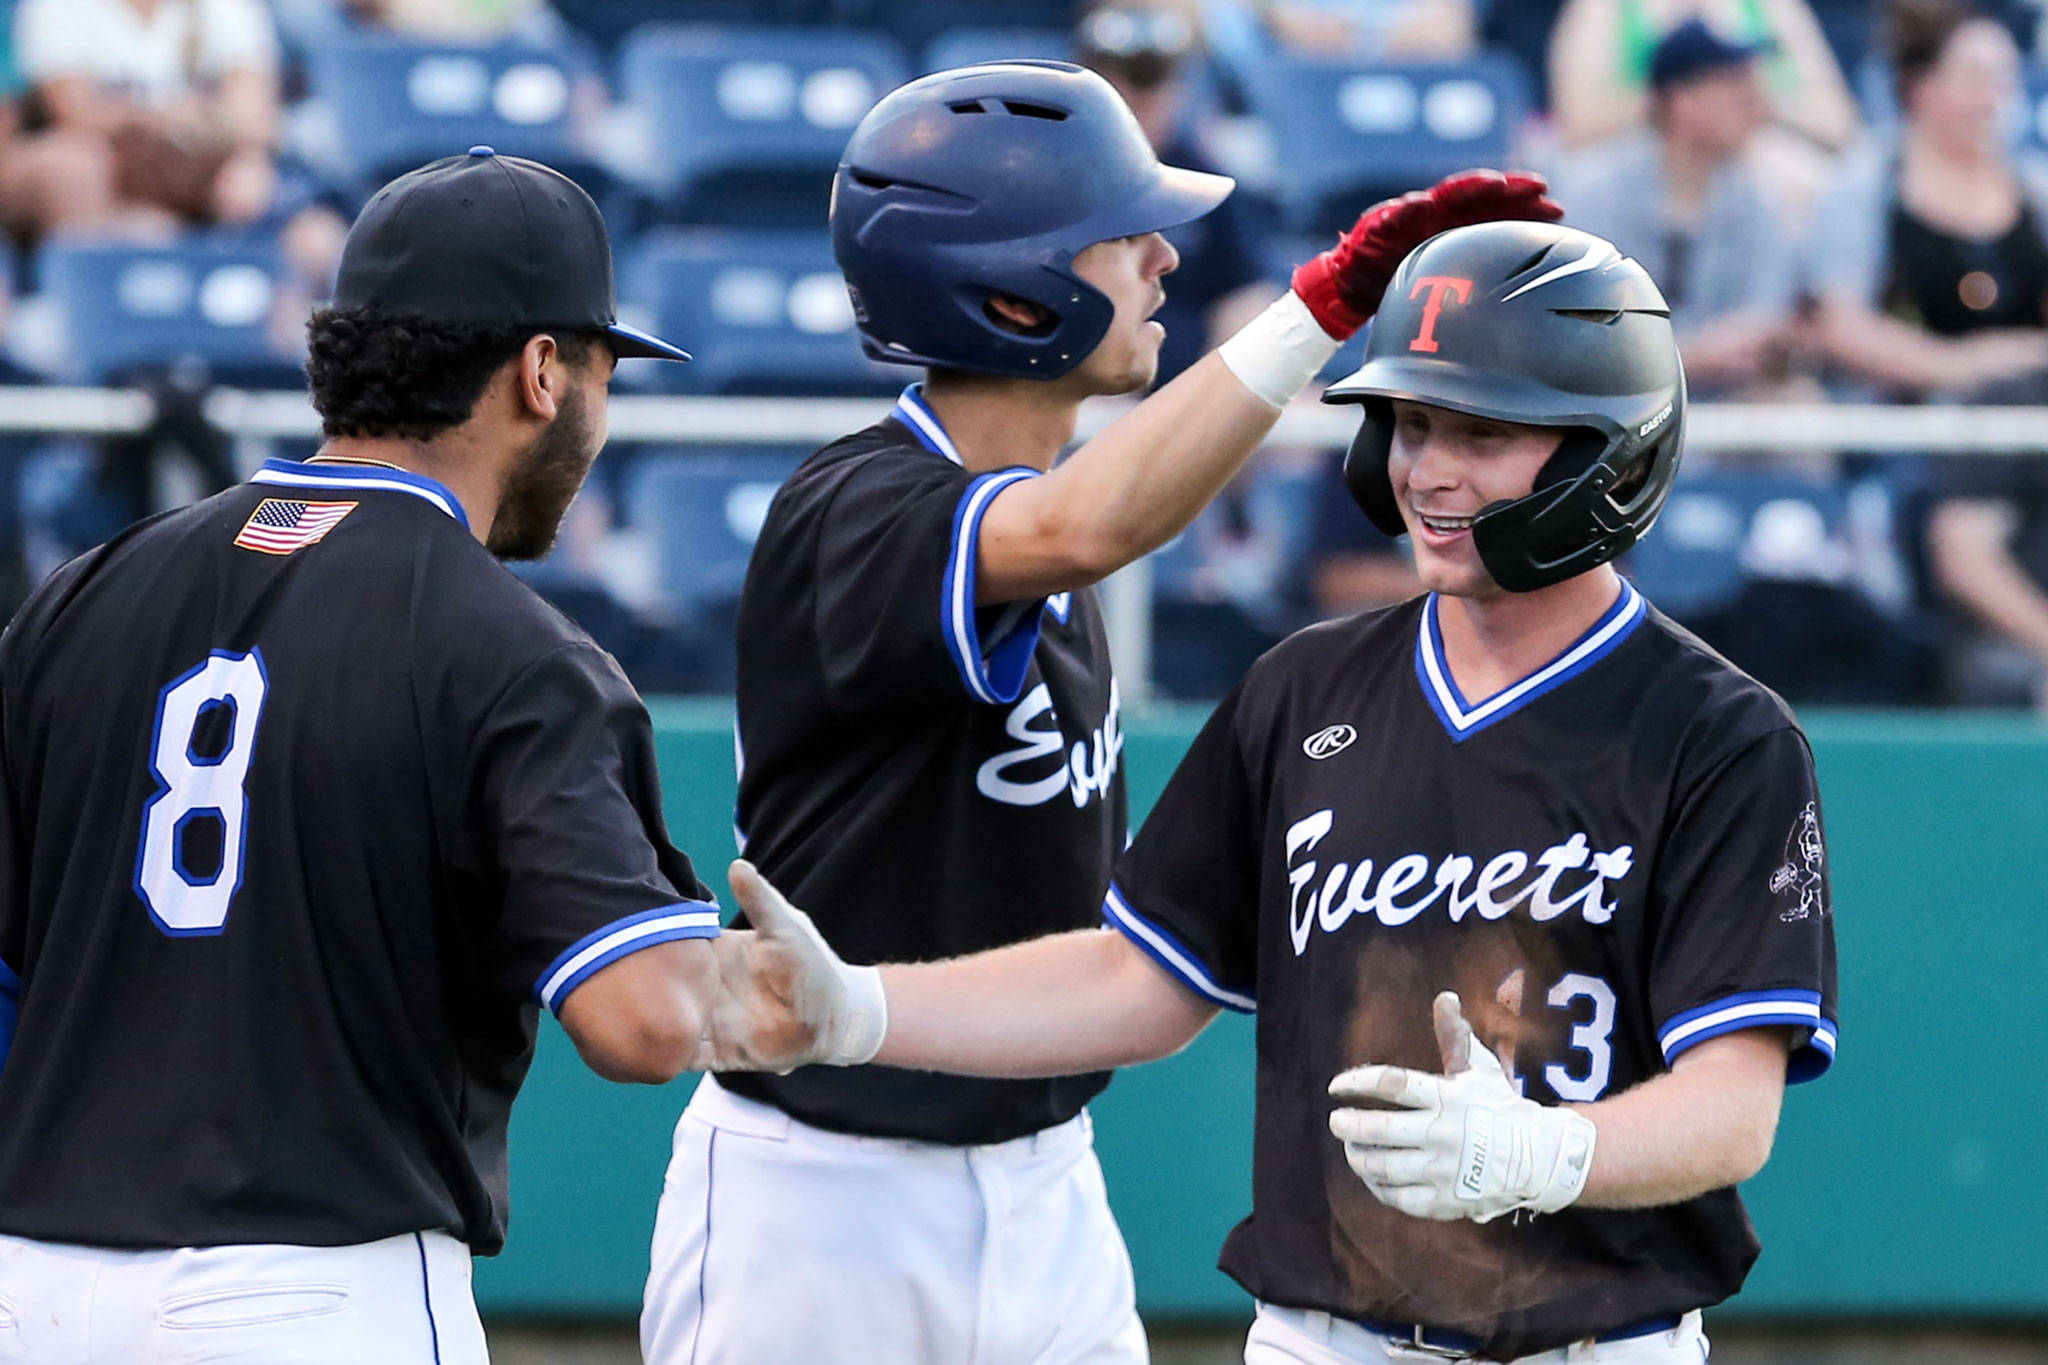 Austin Hauck (right) celebrates with Riley Parker (center) and Koby Blunt (left) after scoring a run the 6th inning against the AquaSox in the Everett Cup on June 12, 2019, at Funko Field at Everett Memorial Stadium. (Kevin Clark / The Herald)